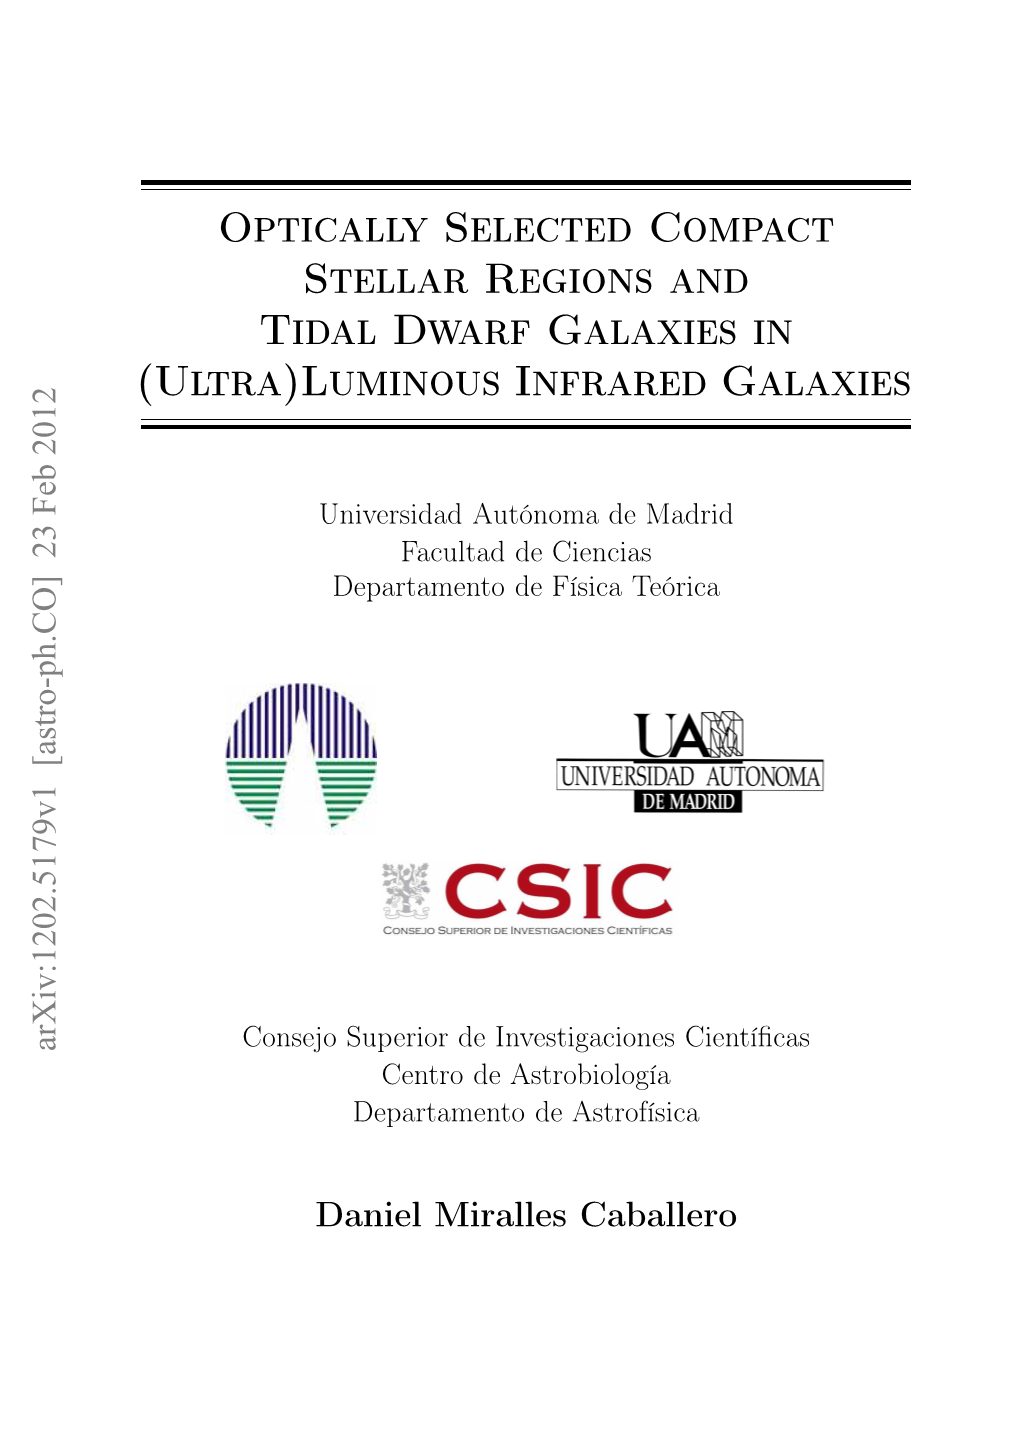 Optically Selected Compact Stellar Regions and Tidal Dwarf Galaxies in (Ultra)Luminous Infrared Galaxies